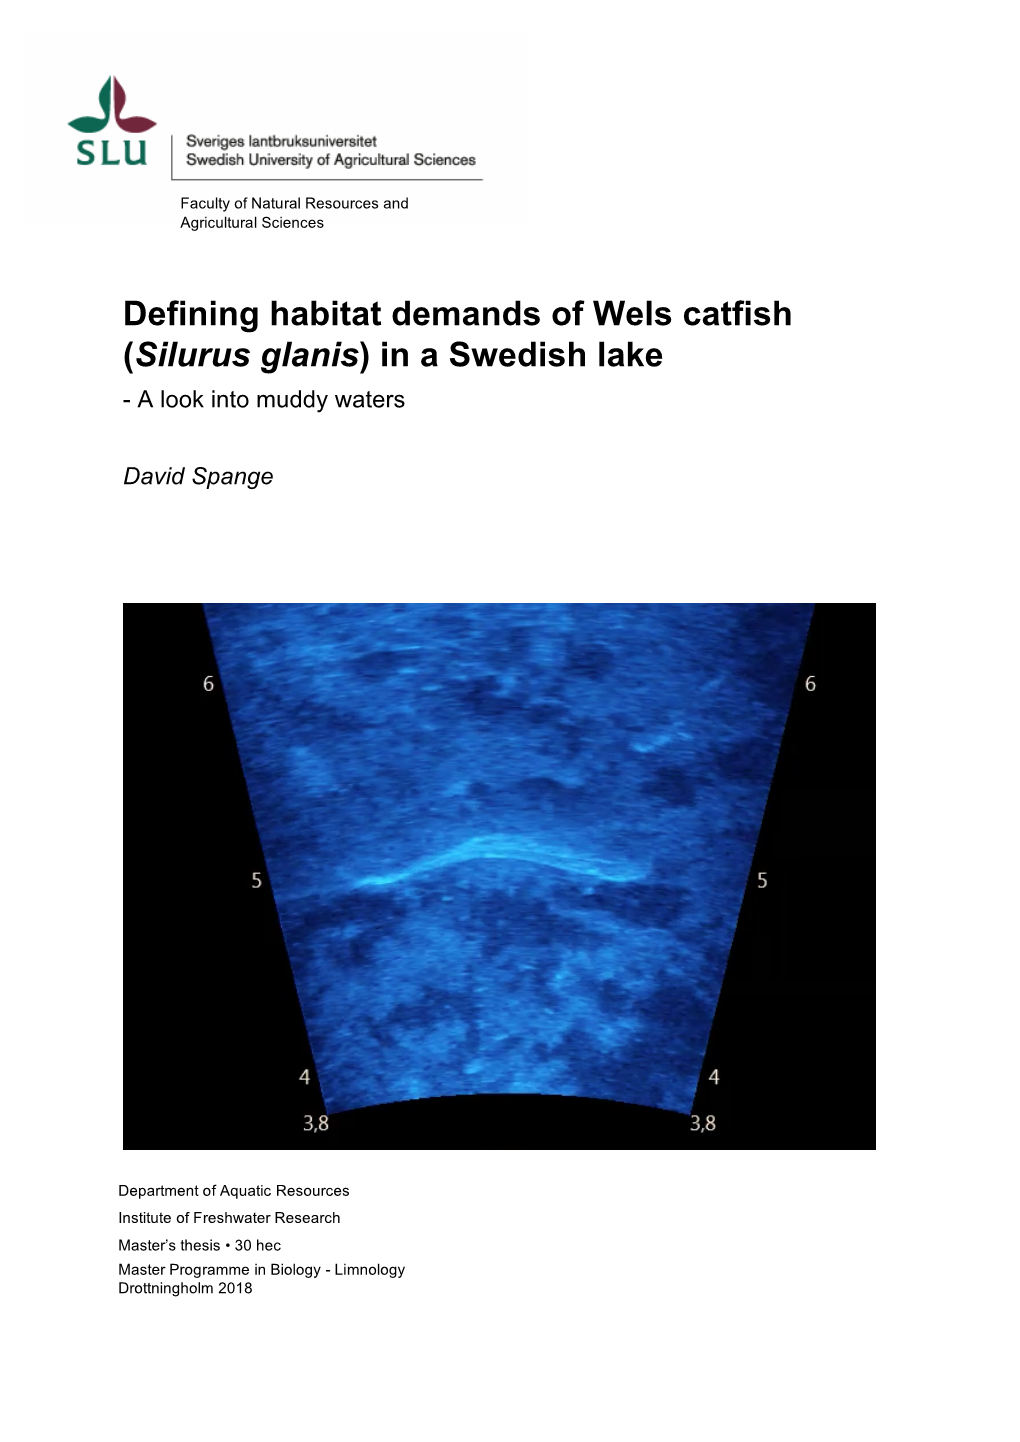 Defining Habitat Demands of Wels Catfish (Silurus Glanis) in a Swedish Lake - a Look Into Muddy Waters